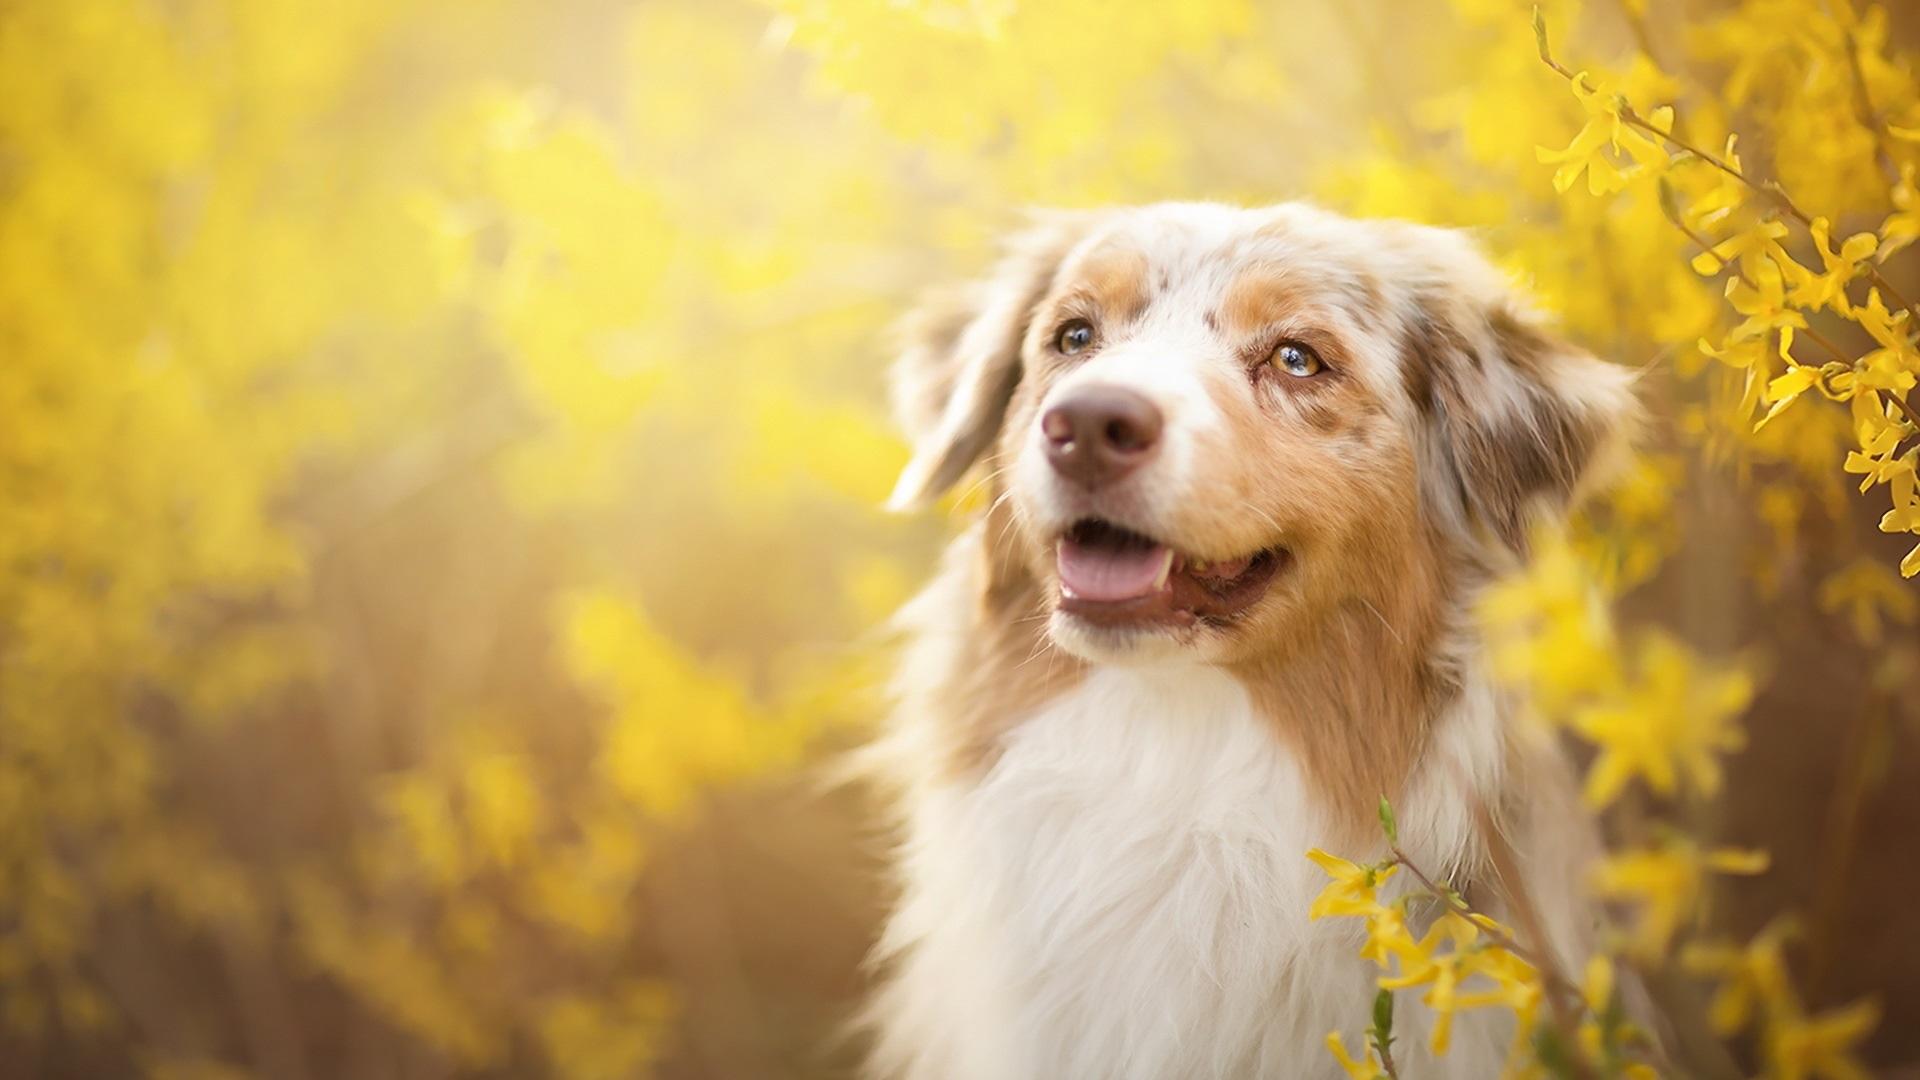 Wallpaper Dog, yellow flowers, spring 1920x1080 Full HD 2K Picture, Image